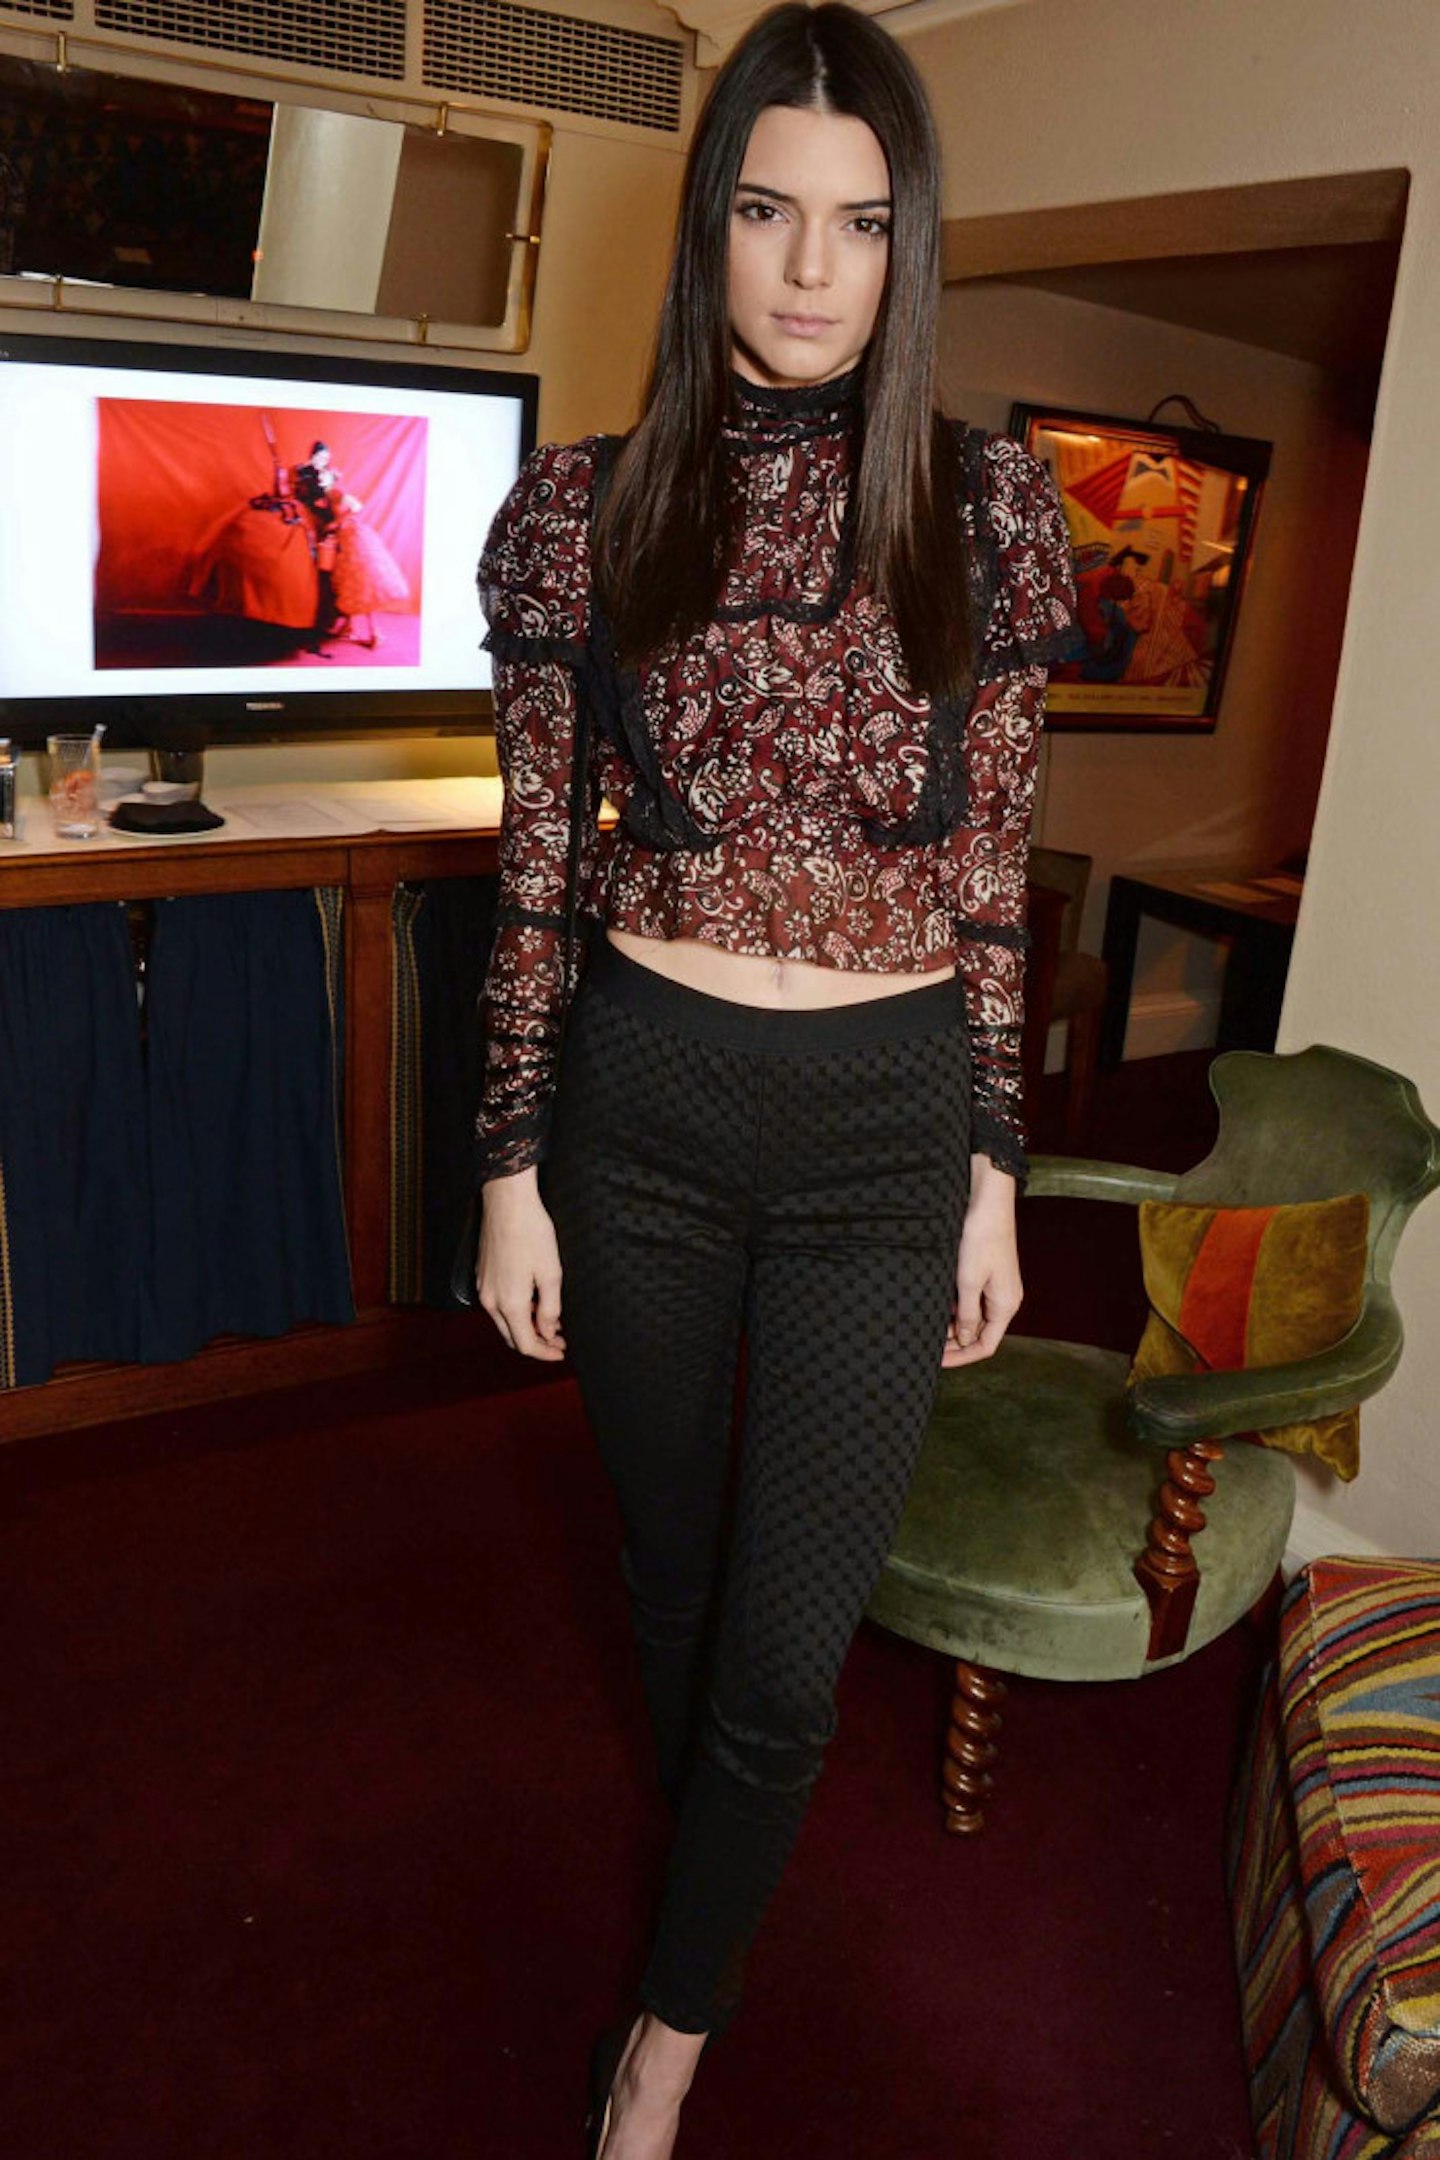 Kendall Jenner attends the launch of LOVE special editions at George, 17 February 2014